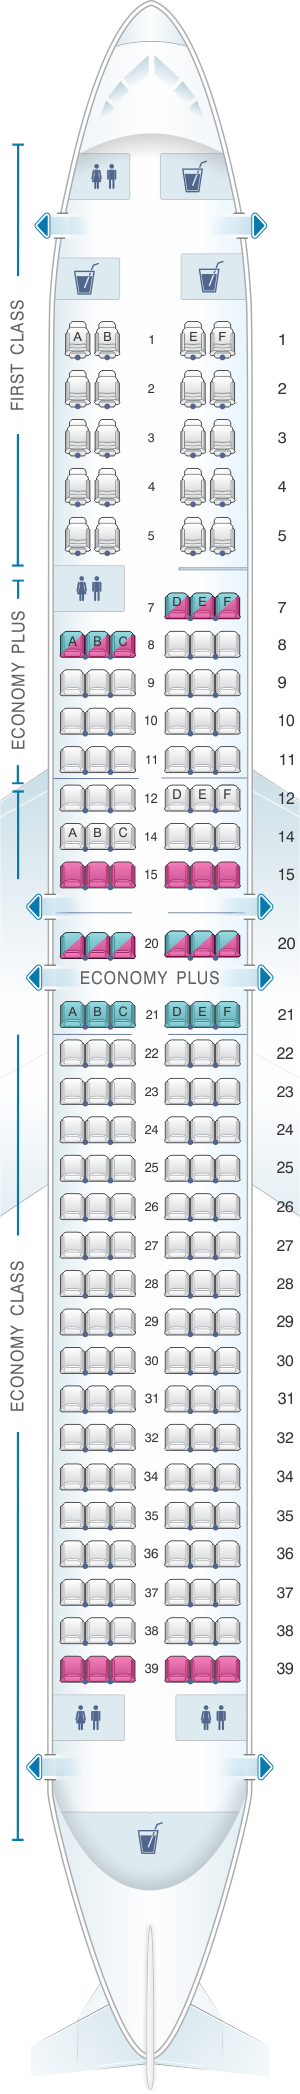 united airlines seat assignment